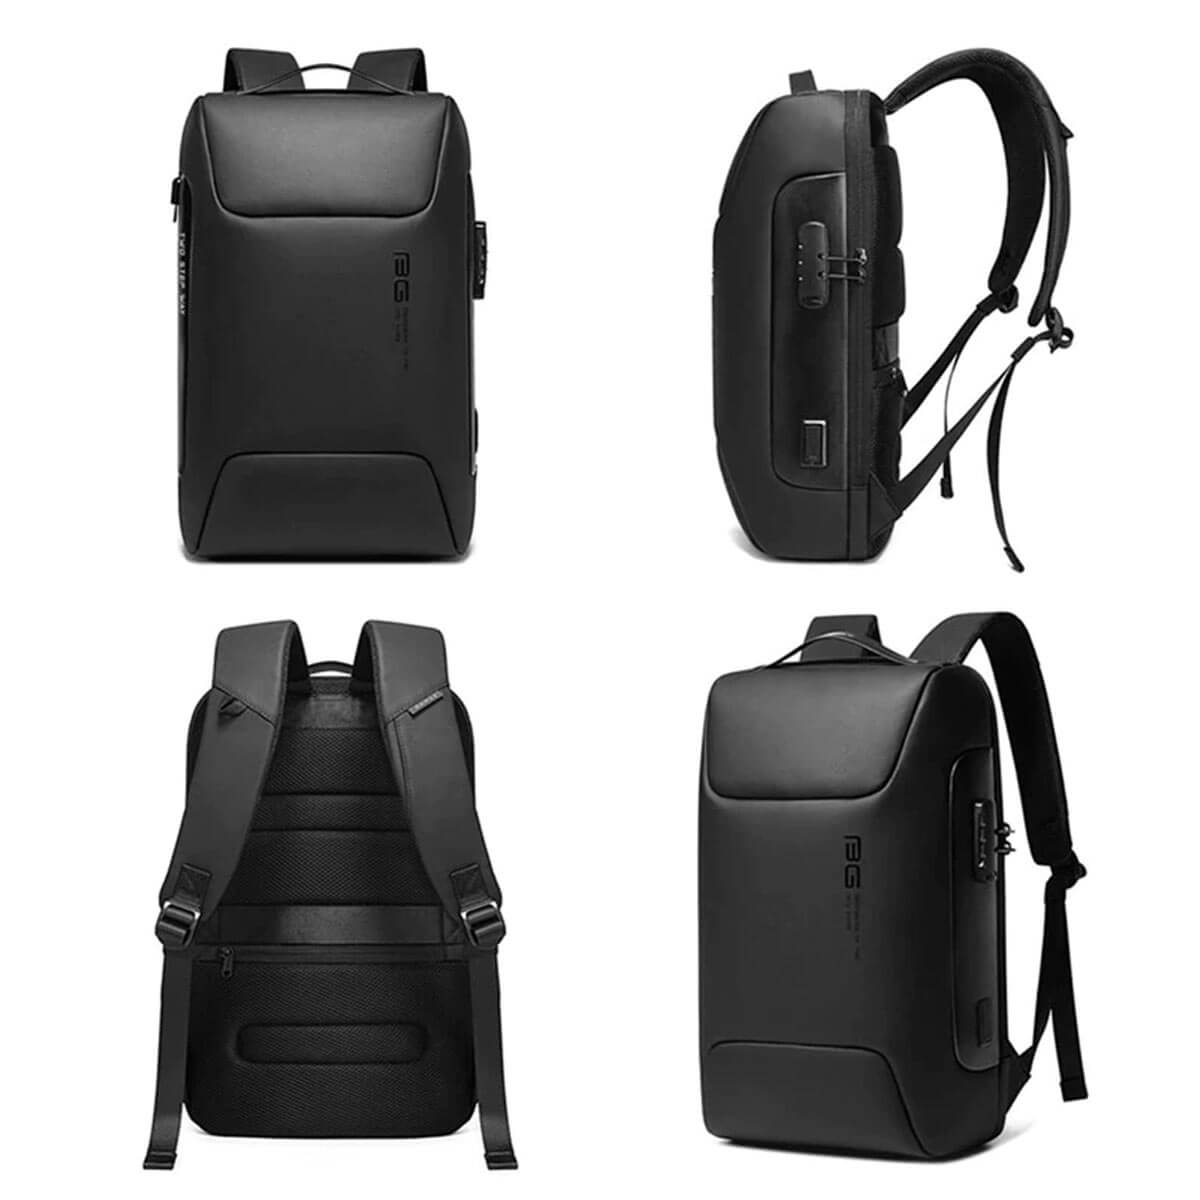 15.6 Laptop Backpack with USB Charging - Waterproof Travel Laptop Backpack